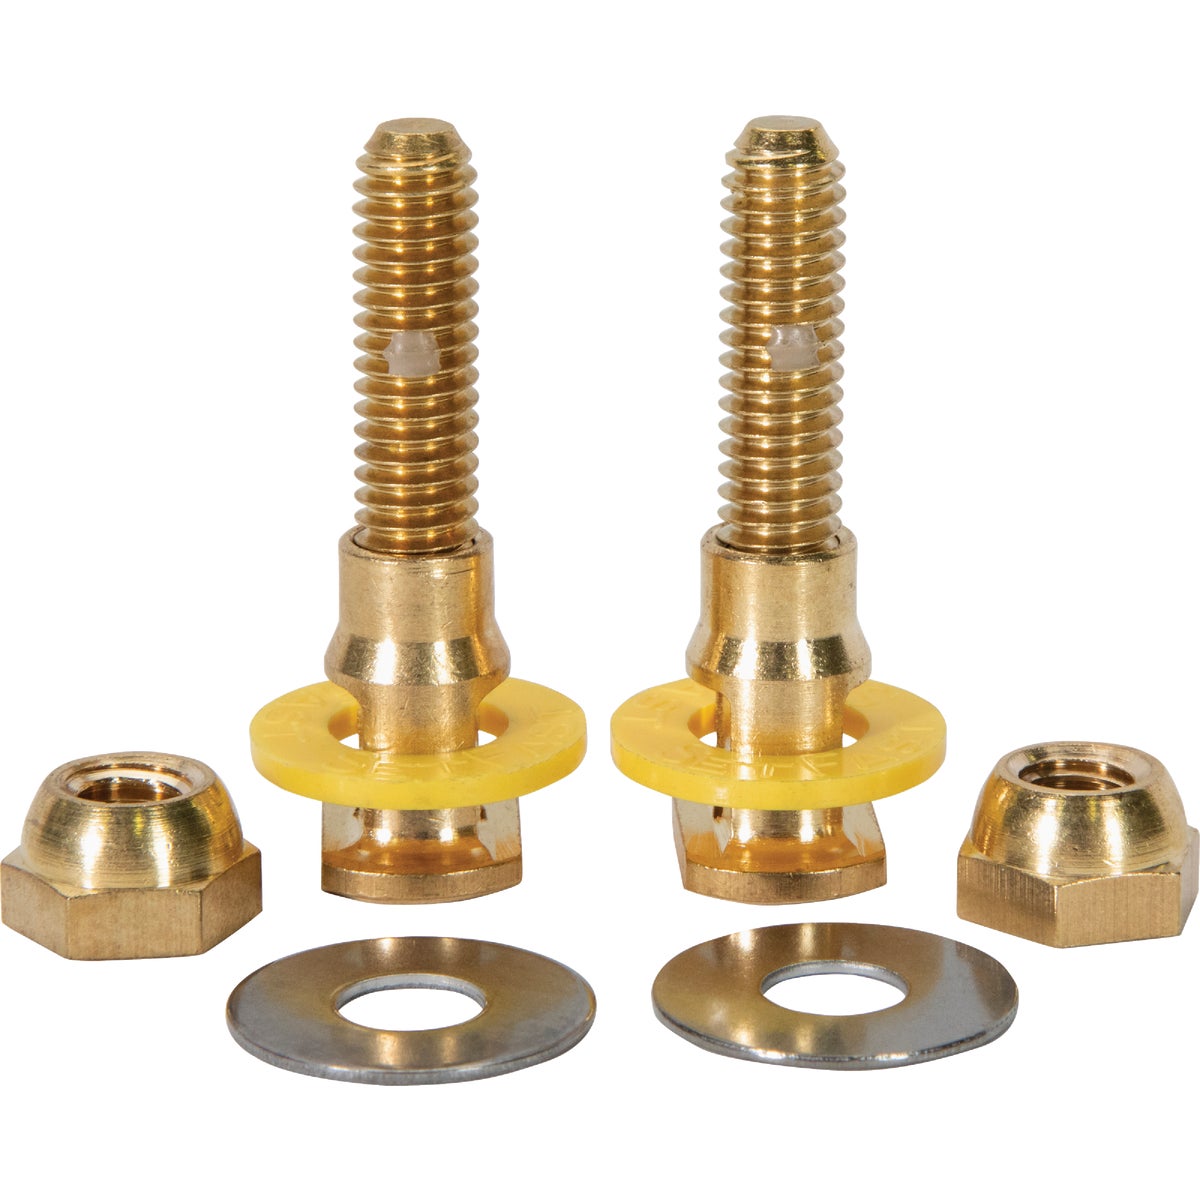 Fluidmaster SetFast 5/16 In. x 1-1/2 to 2-1/4 In. Adjustable Brass Toilet Bolts (2 Pack)